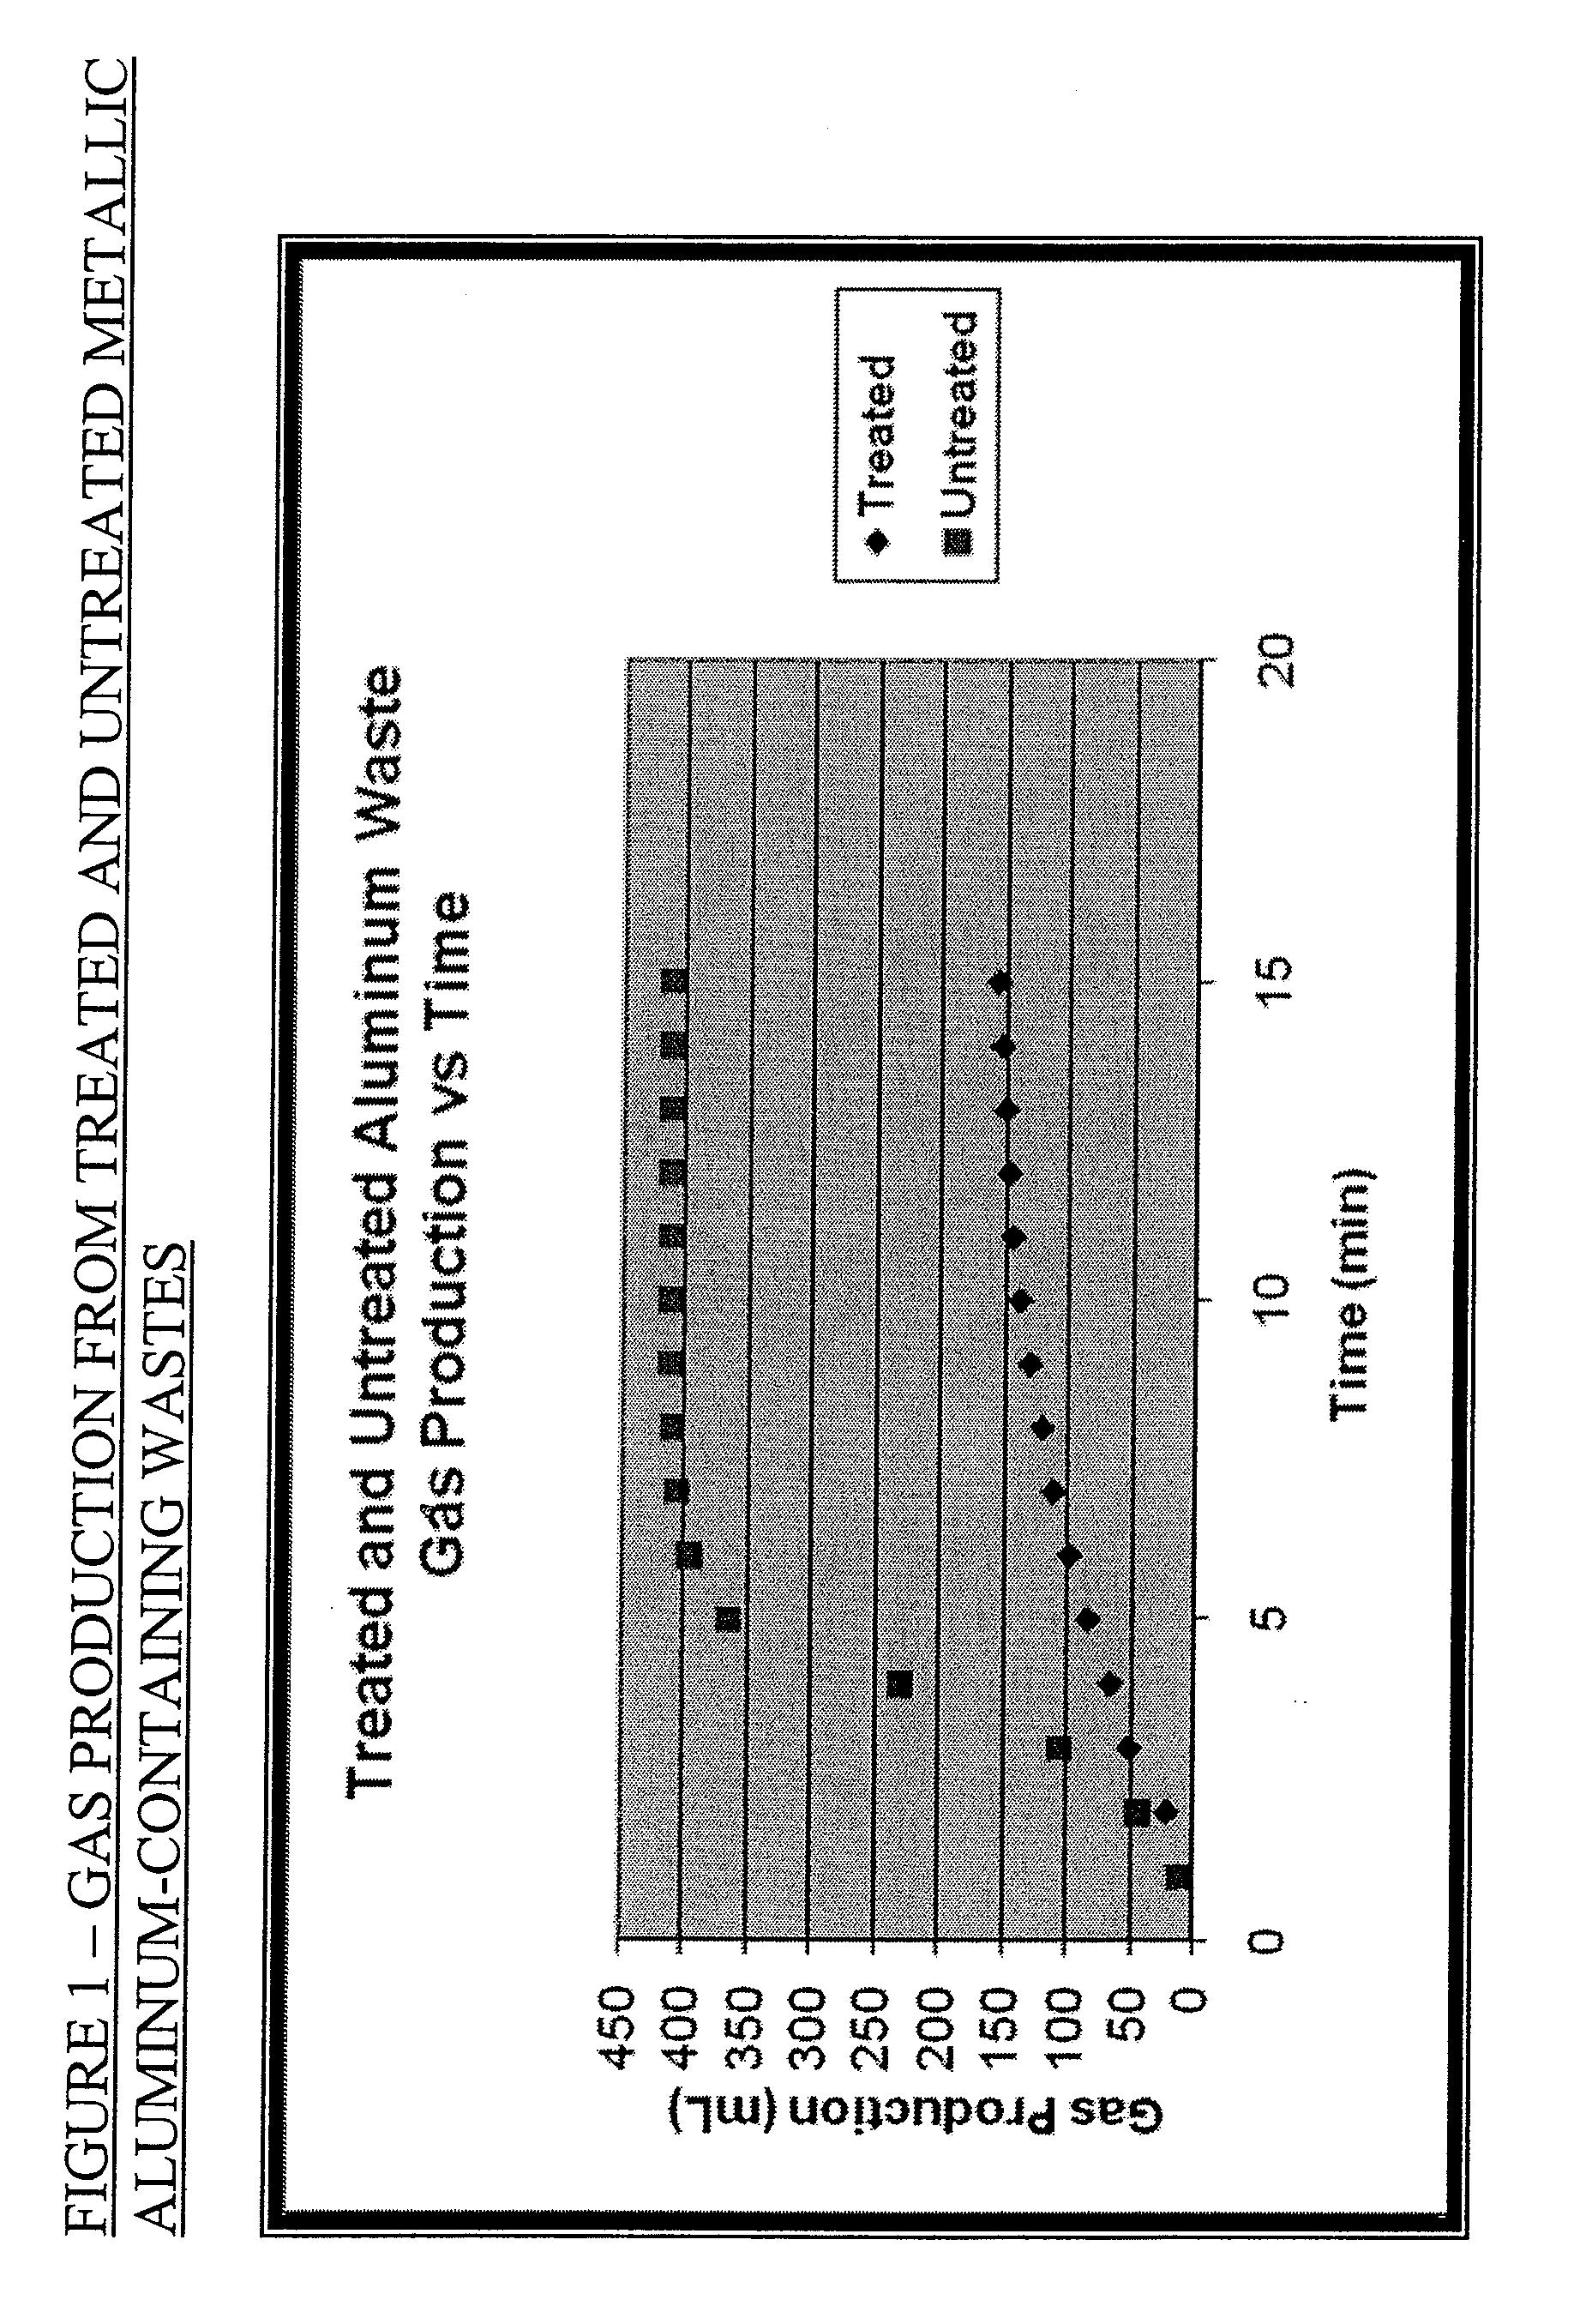 Method for Stabilization and/or Fixation of Leachable Metals